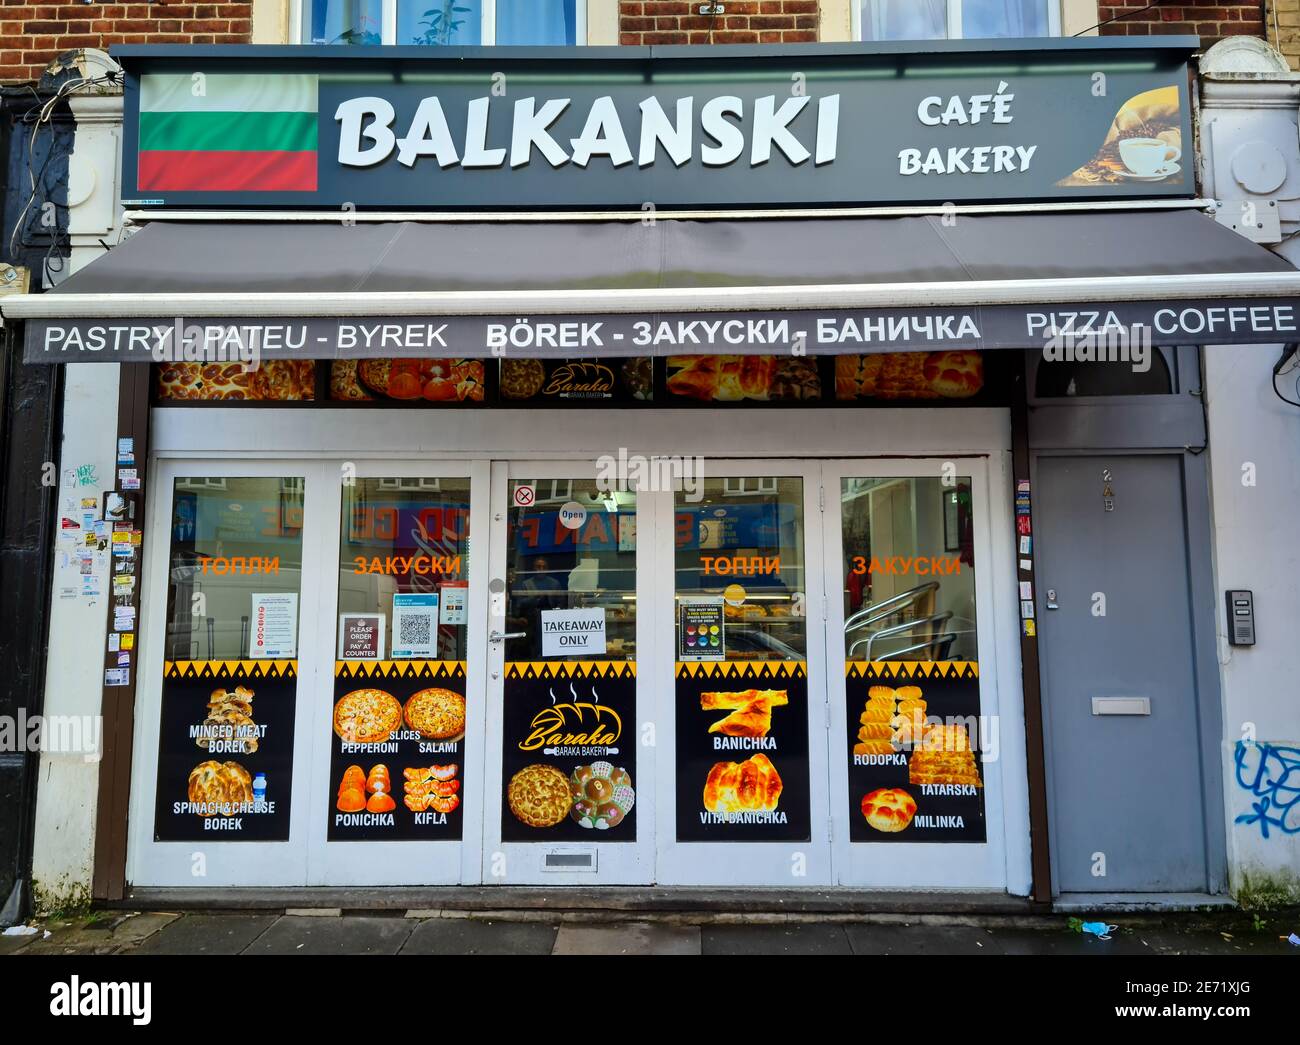 A London cafe, bakery offering food and drinks from the Balkans. Stock Photo